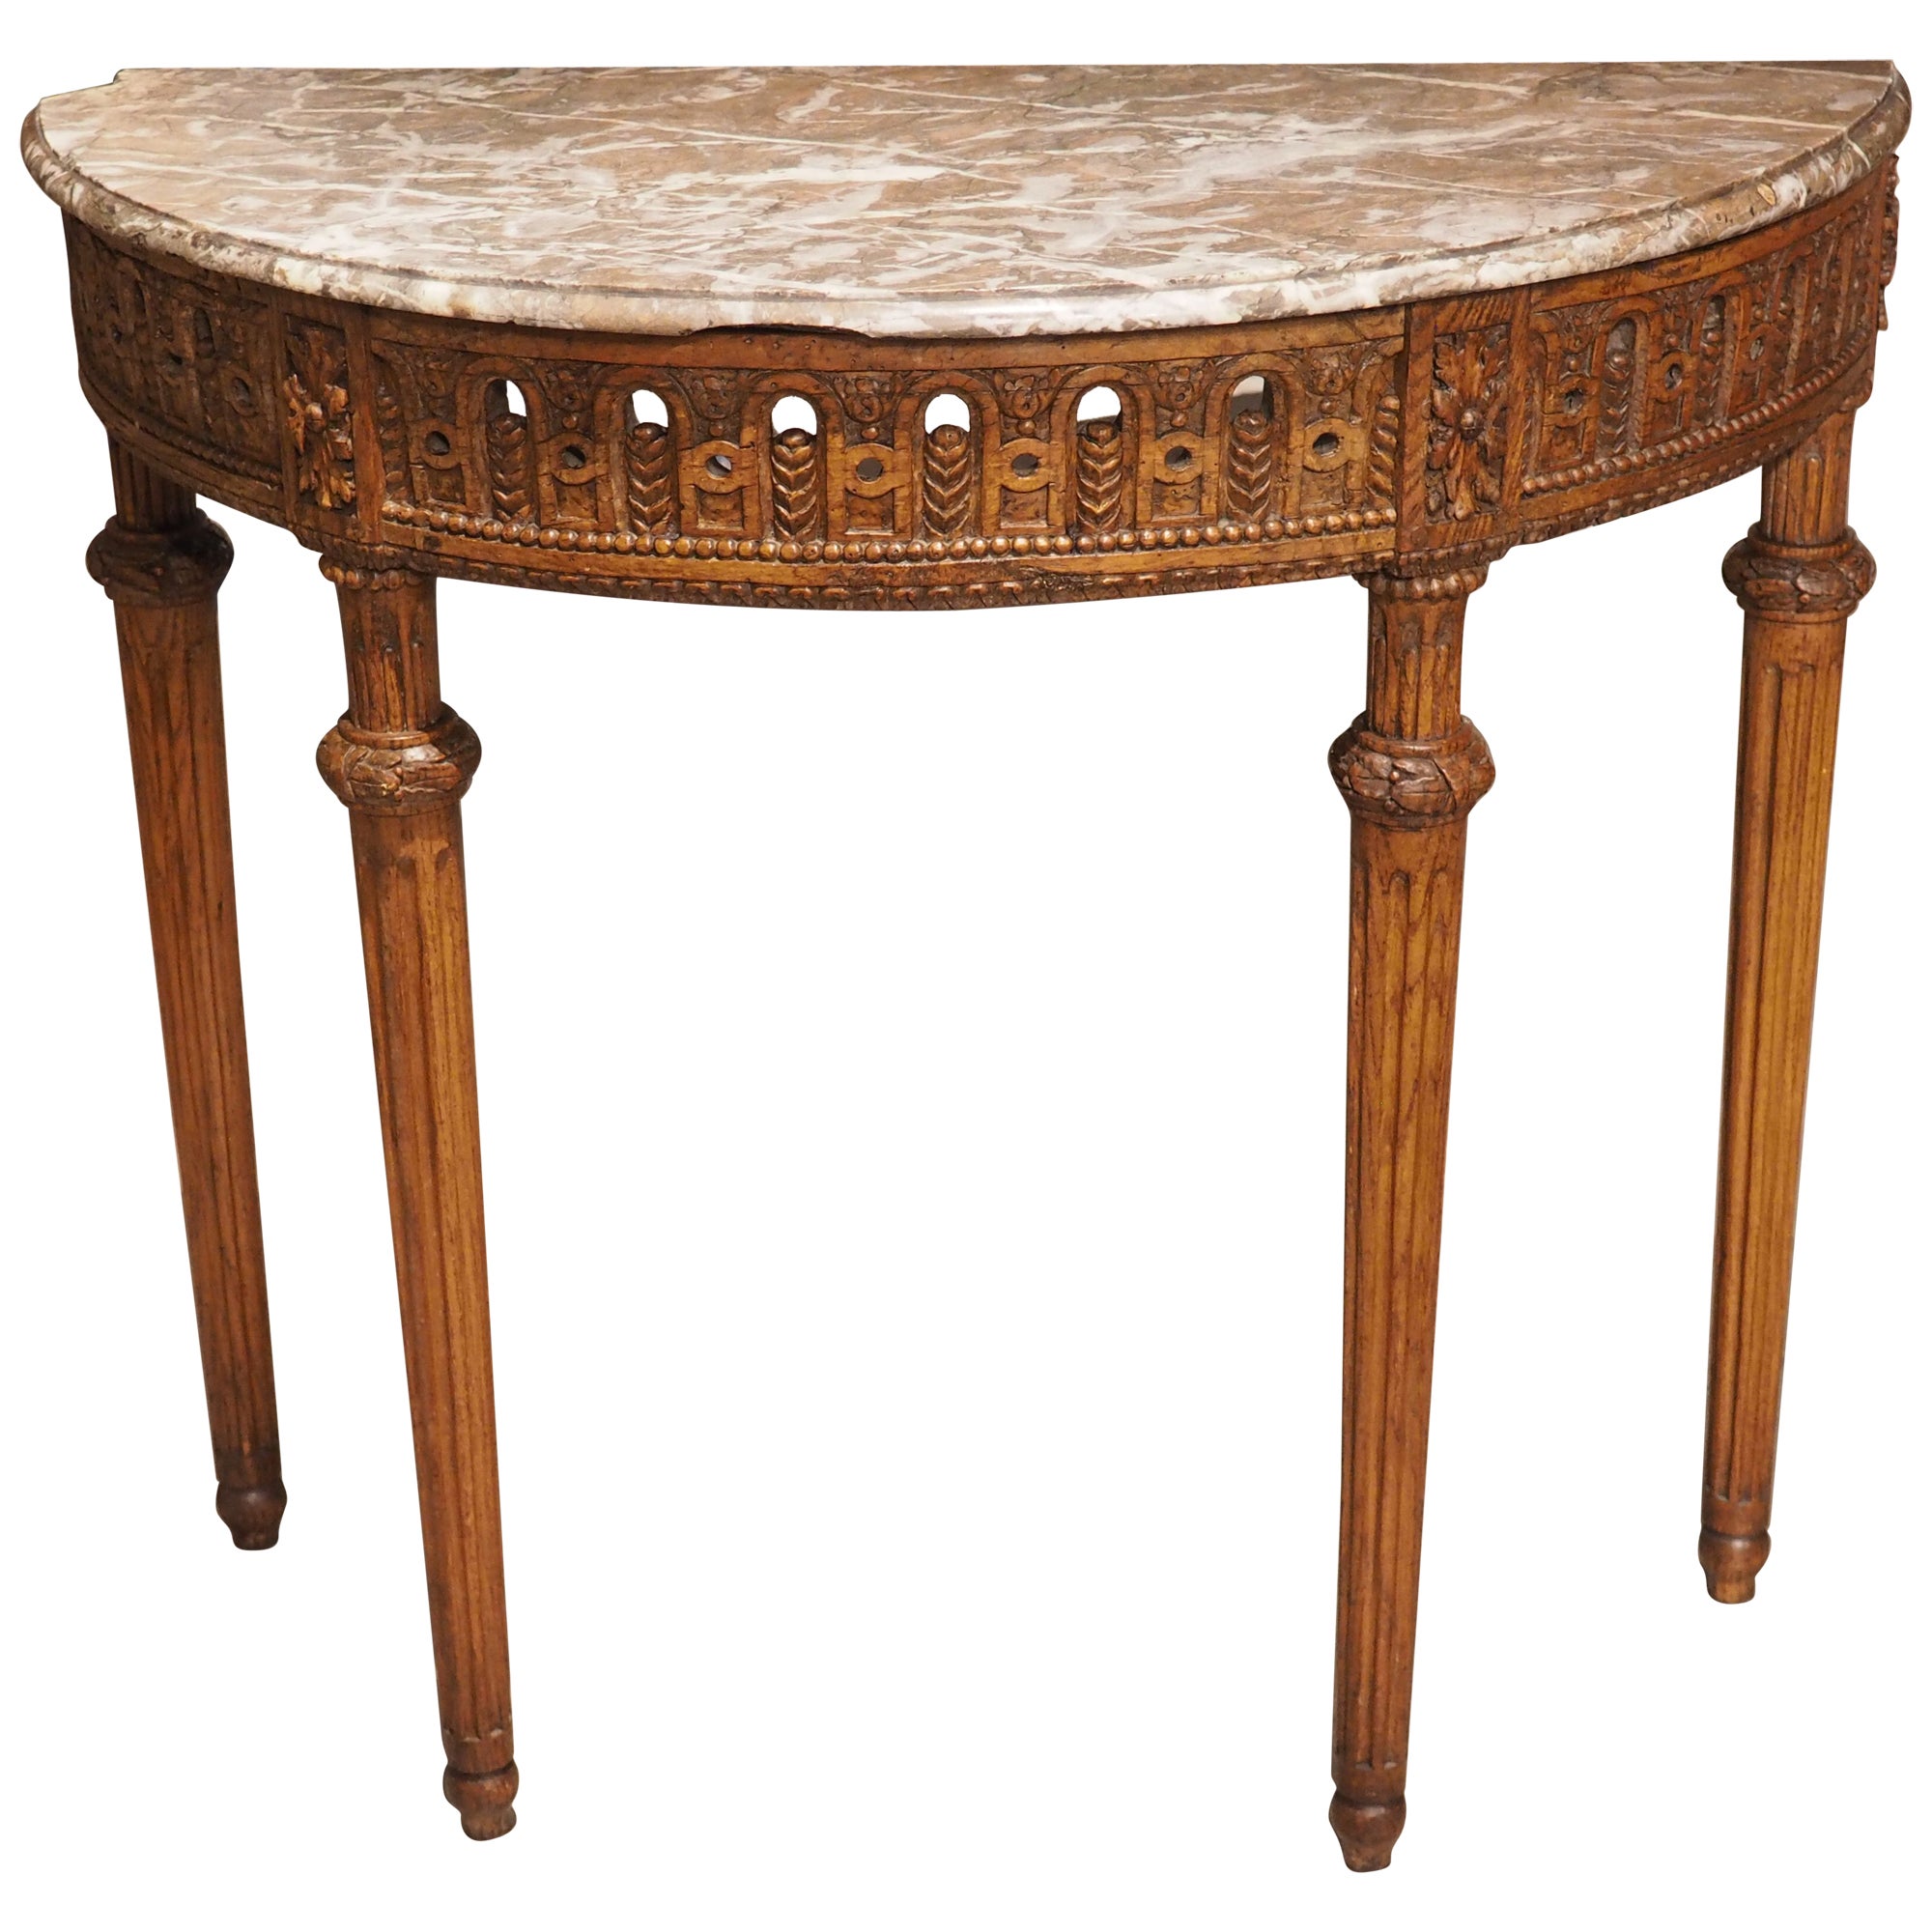 Period French Louis XVI Carved Oak and Marble Demi Lune Console Table, C. 1785